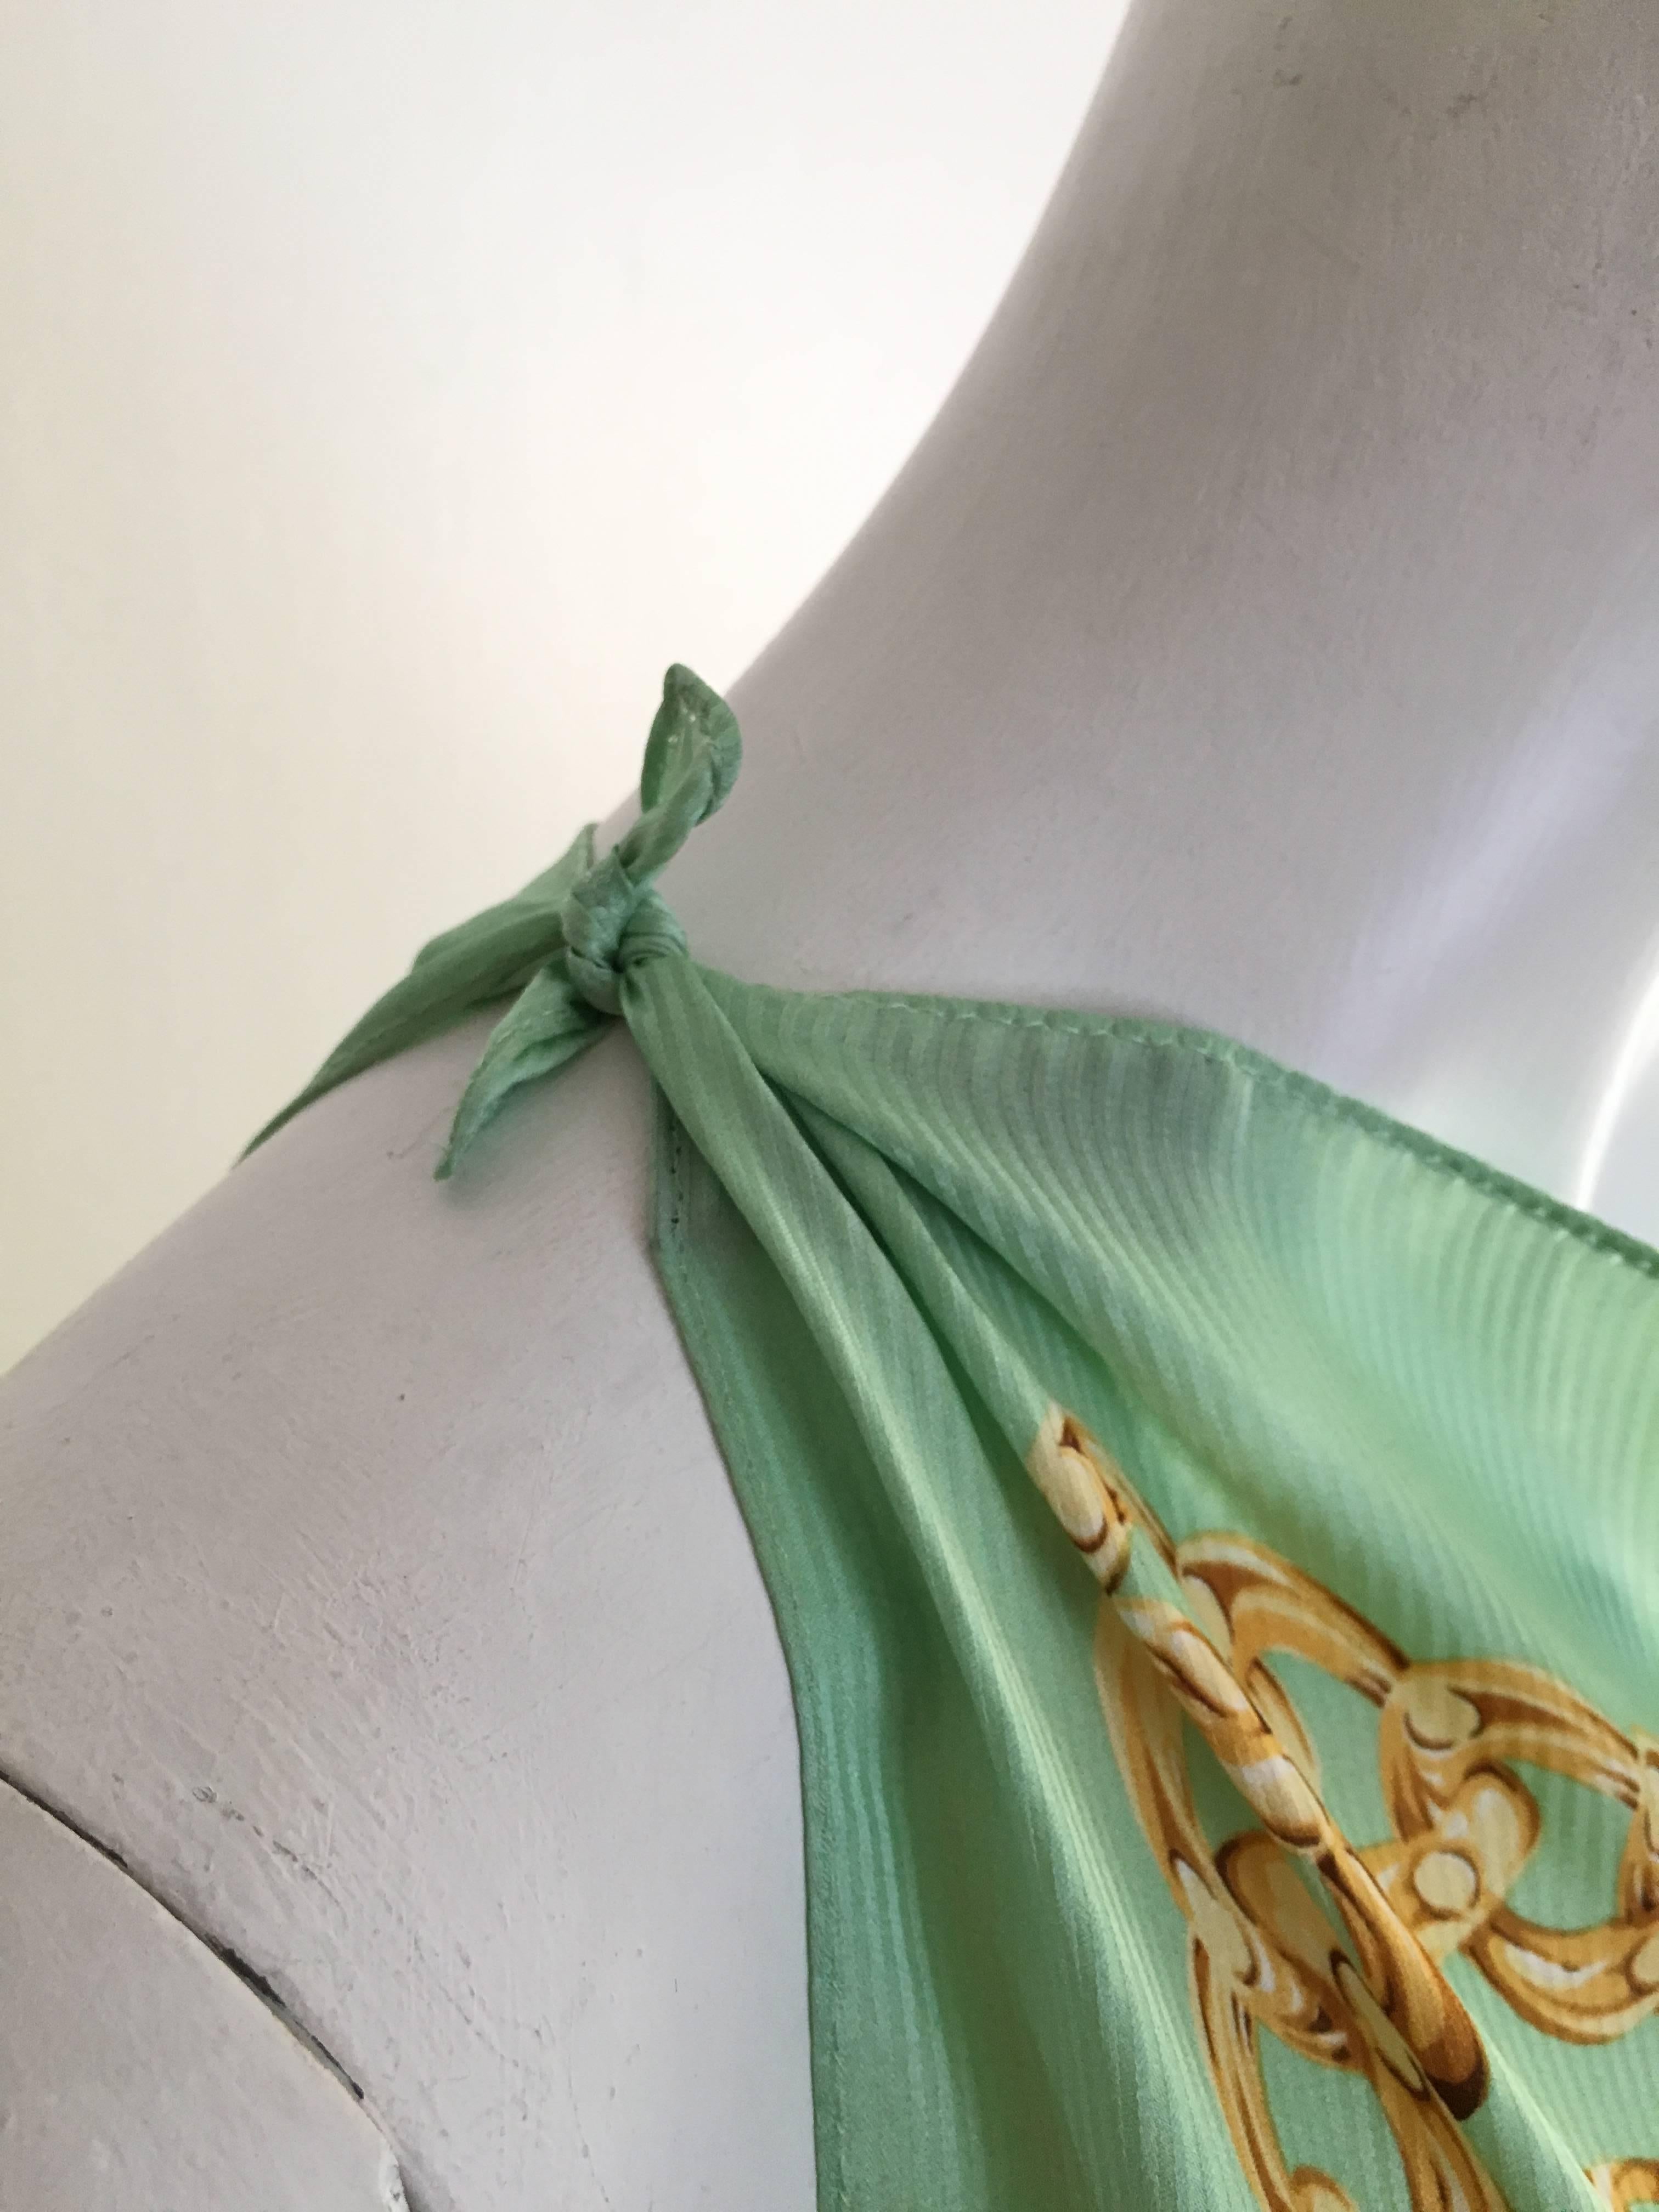 Paco Rabanne Paris 1997 celery green large silk scarf.
This gorgeous color and pattern is more than just your average scarf.  You can turn this into several different tops or even a cover up over a dress or your vintage YSL black slacks. Take your